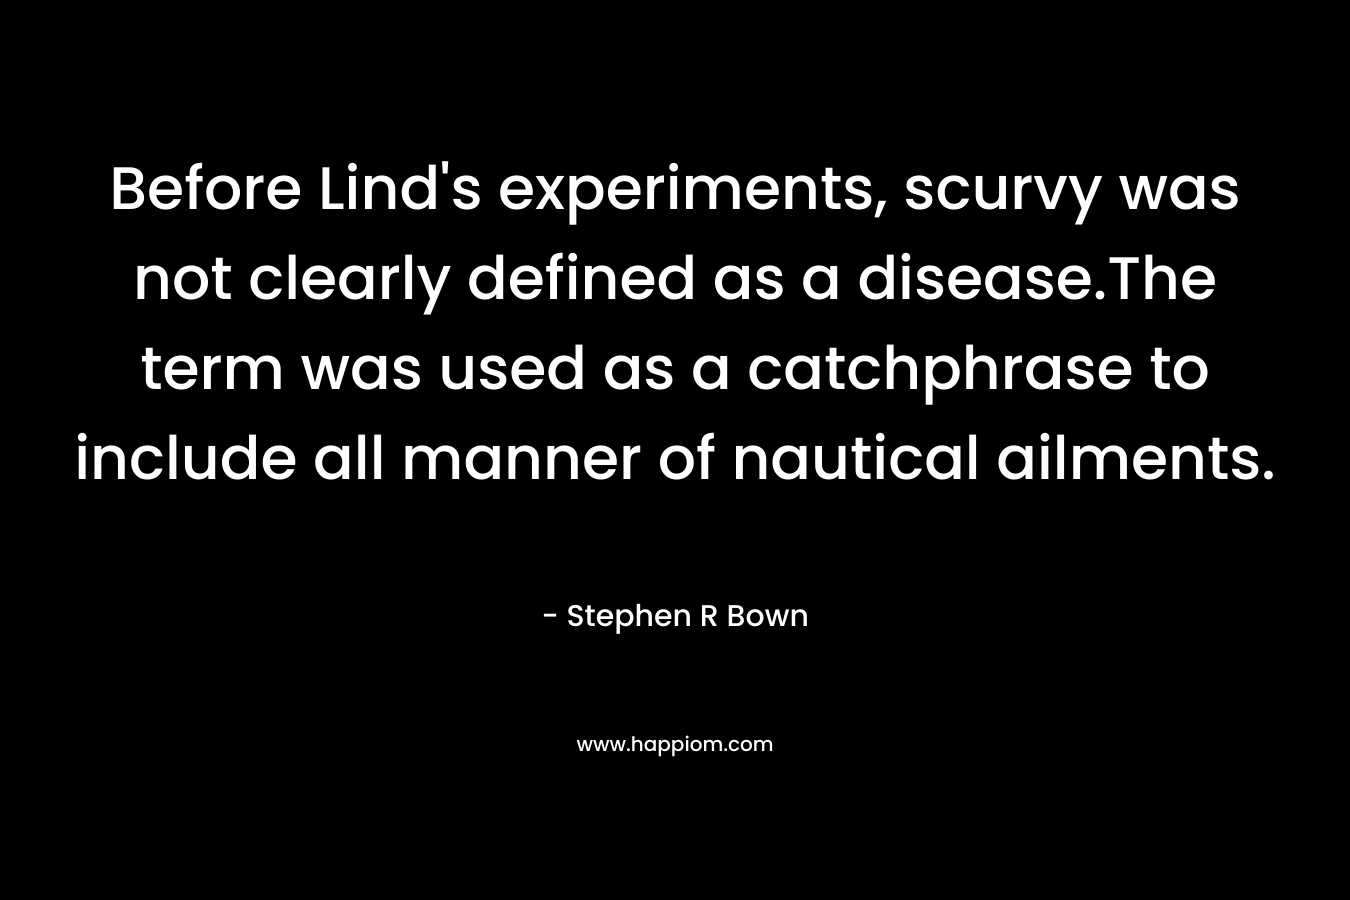 Before Lind’s experiments, scurvy was not clearly defined as a disease.The term was used as a catchphrase to include all manner of nautical ailments. – Stephen R Bown